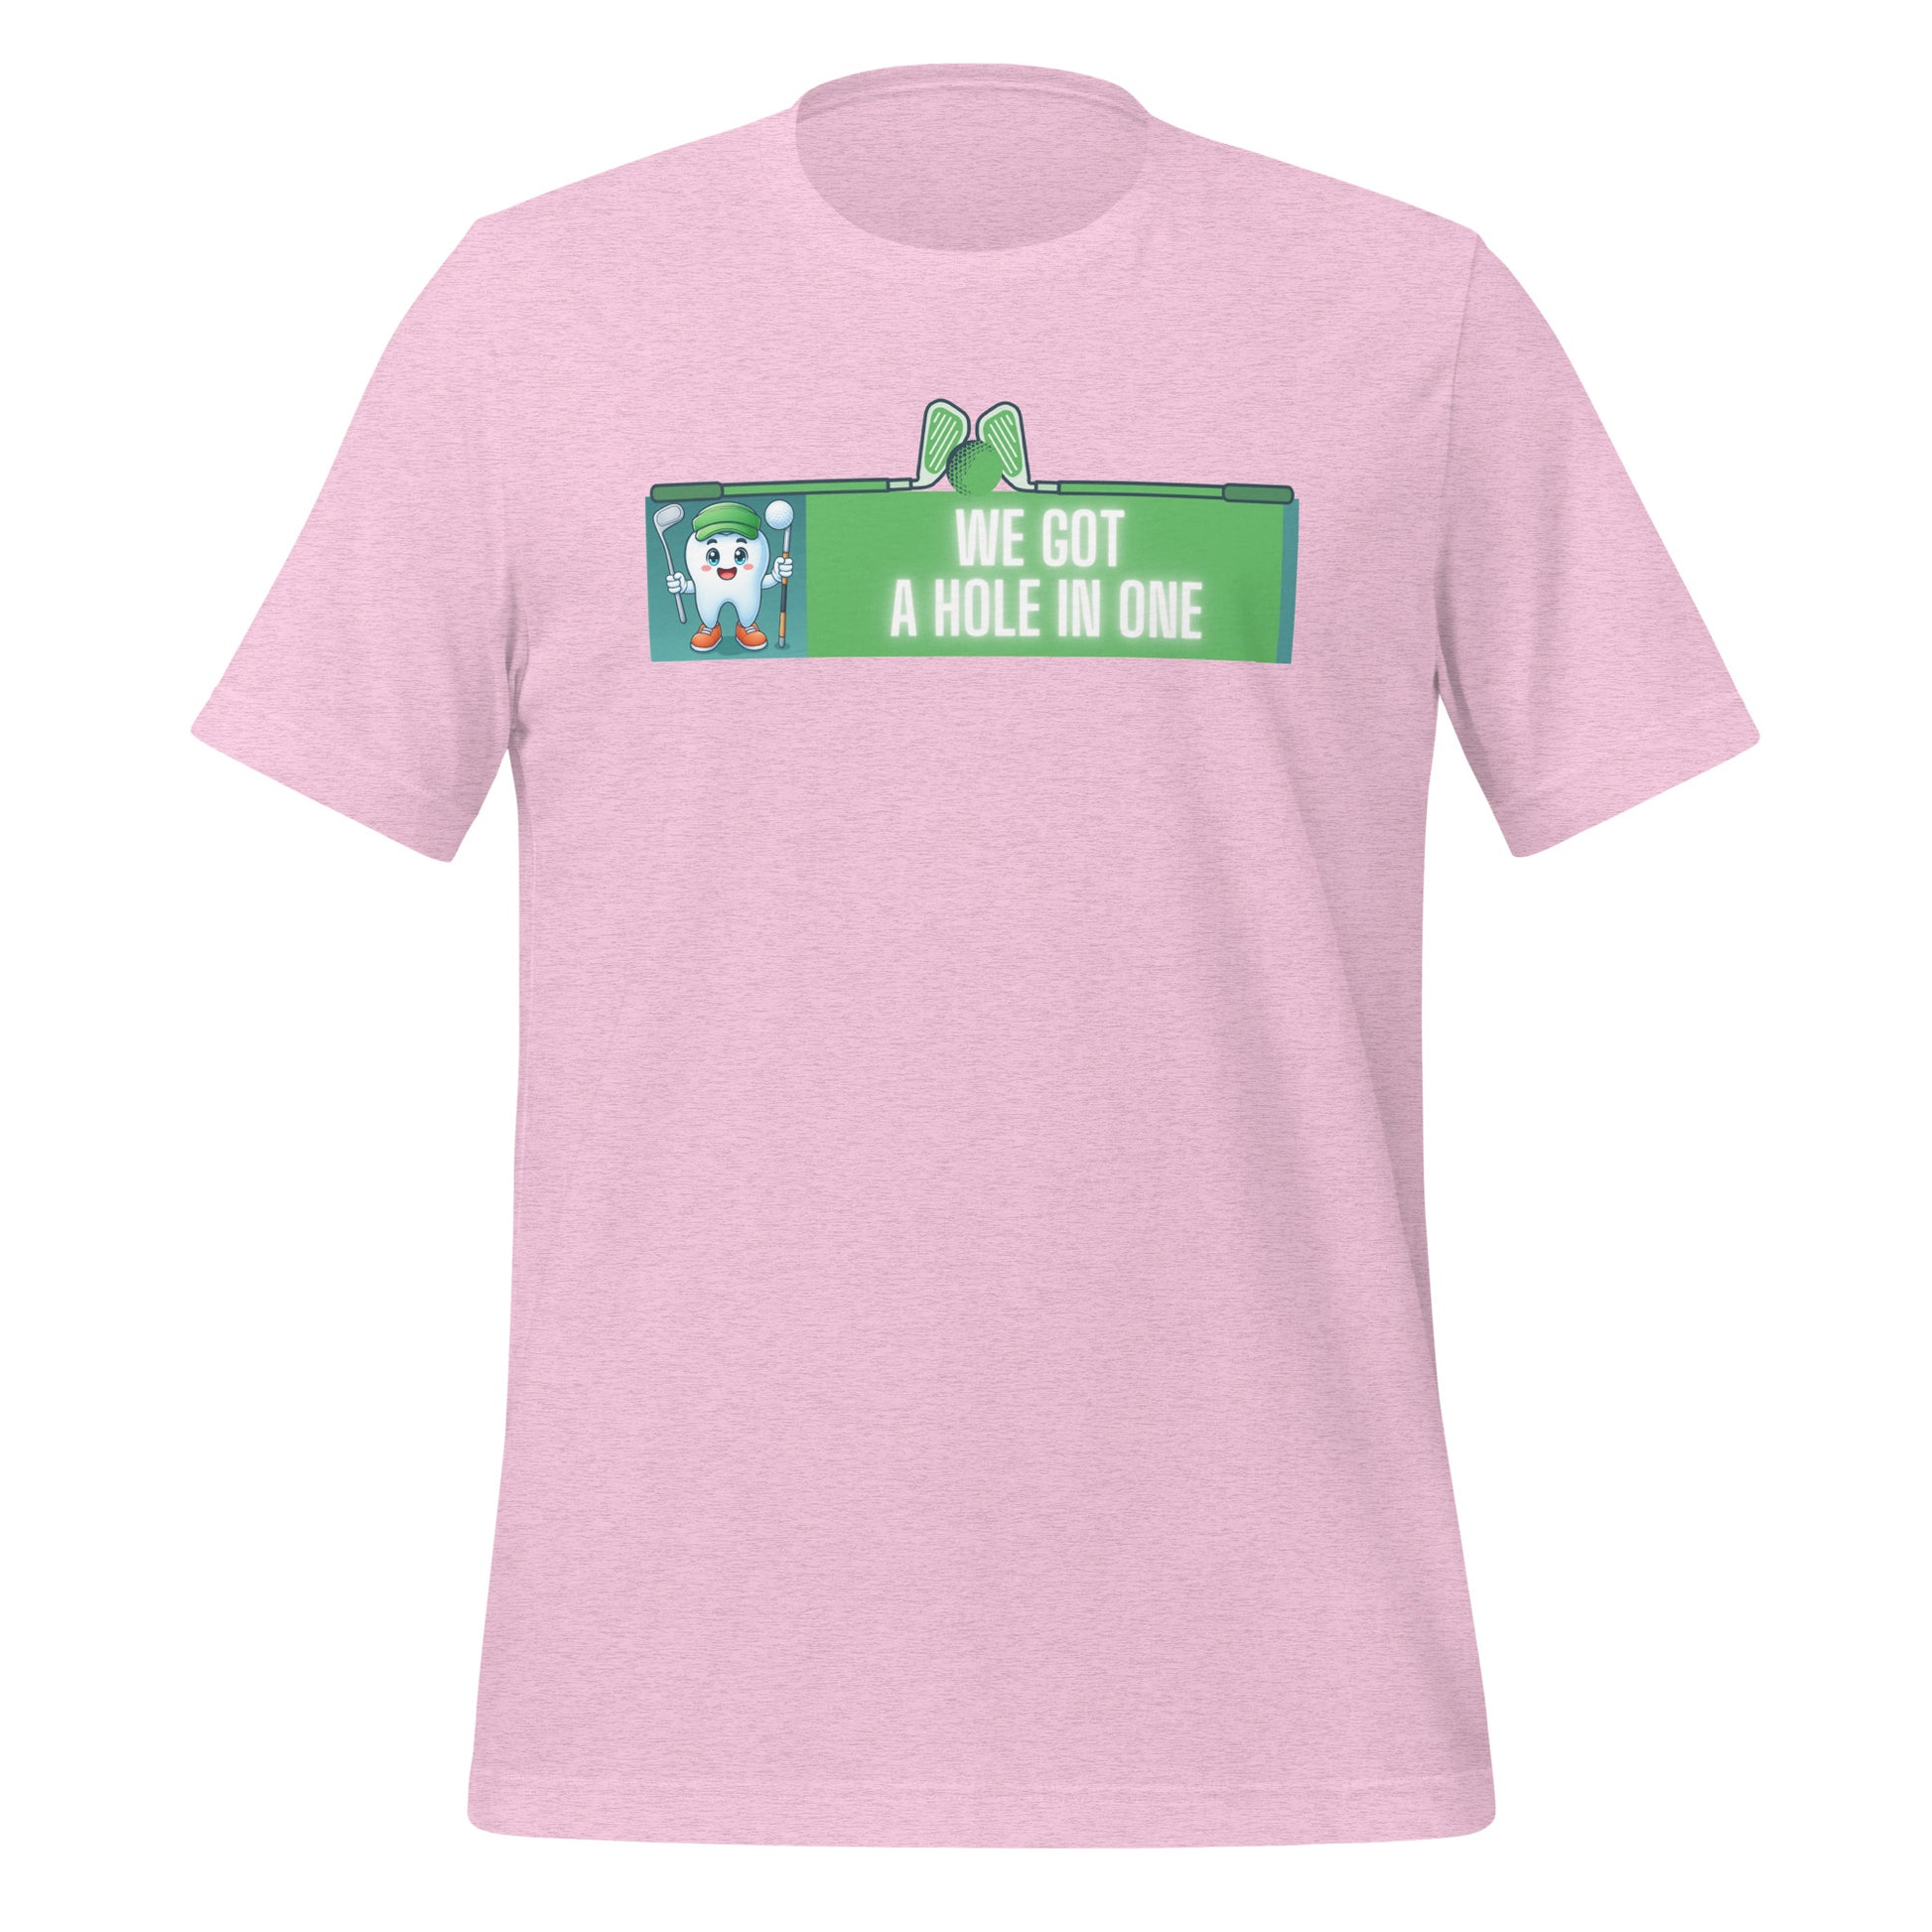 Cute dentist t-shirt showcasing an adorable tooth character in golf attire, joyfully celebrating a ‘hole in one’ achievement, perfect for dentist and dental professionals seeking unique and thematic dental apparel. Heather prism lilac color, front view.